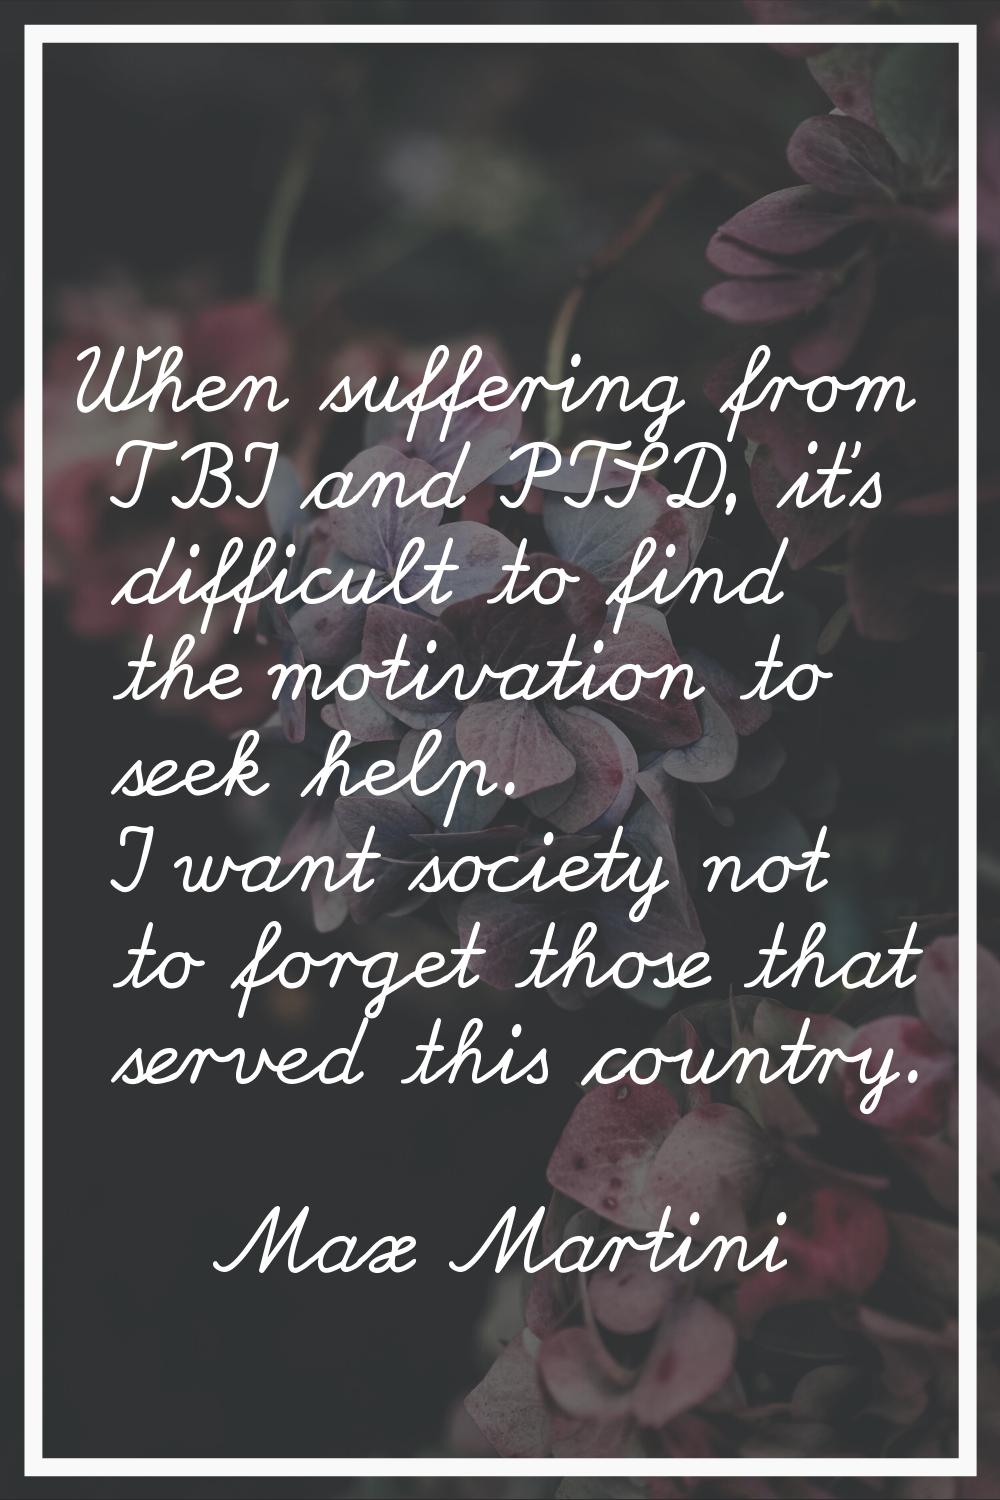 When suffering from TBI and PTSD, it's difficult to find the motivation to seek help. I want societ